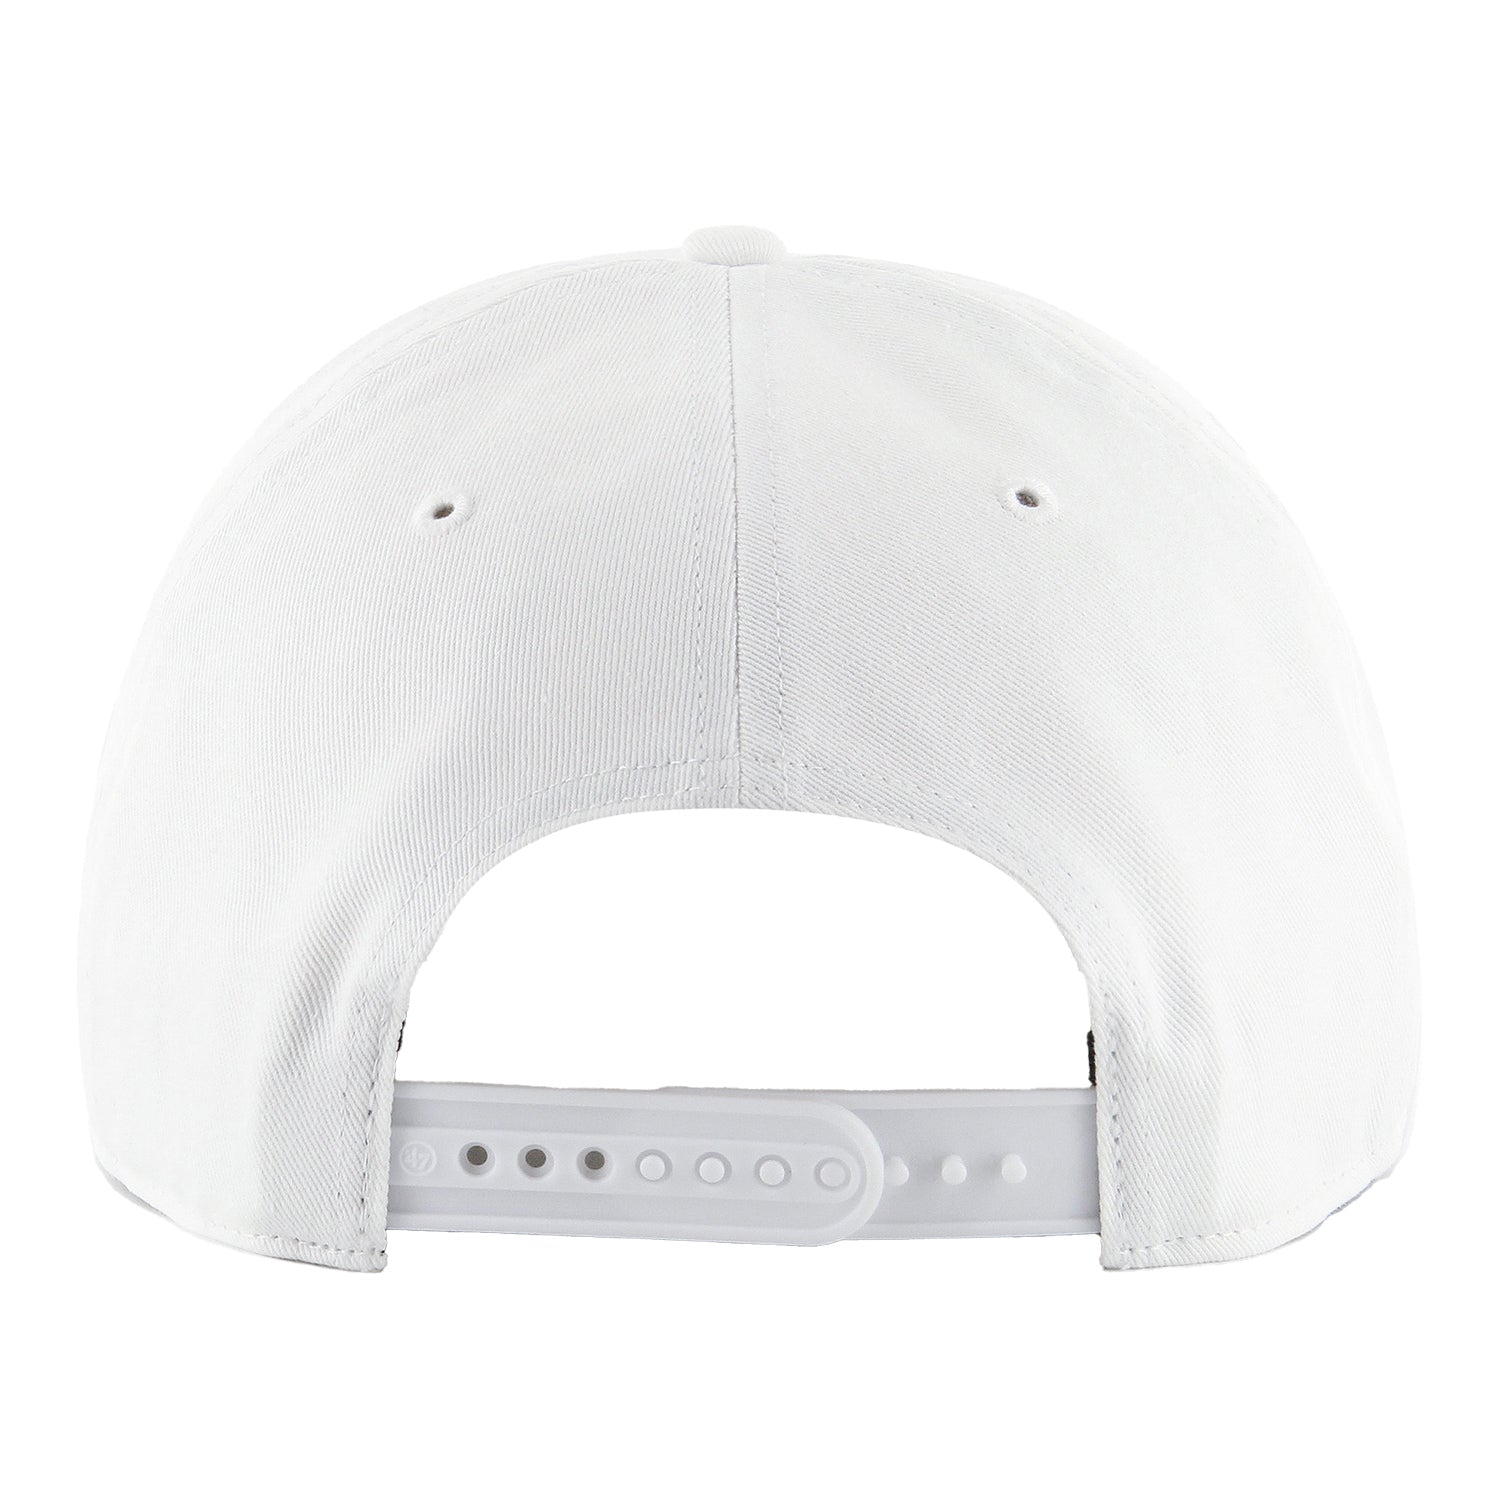 '47 Brand 2024 PGA Championship Structured Adjustable Hat in White - Front View